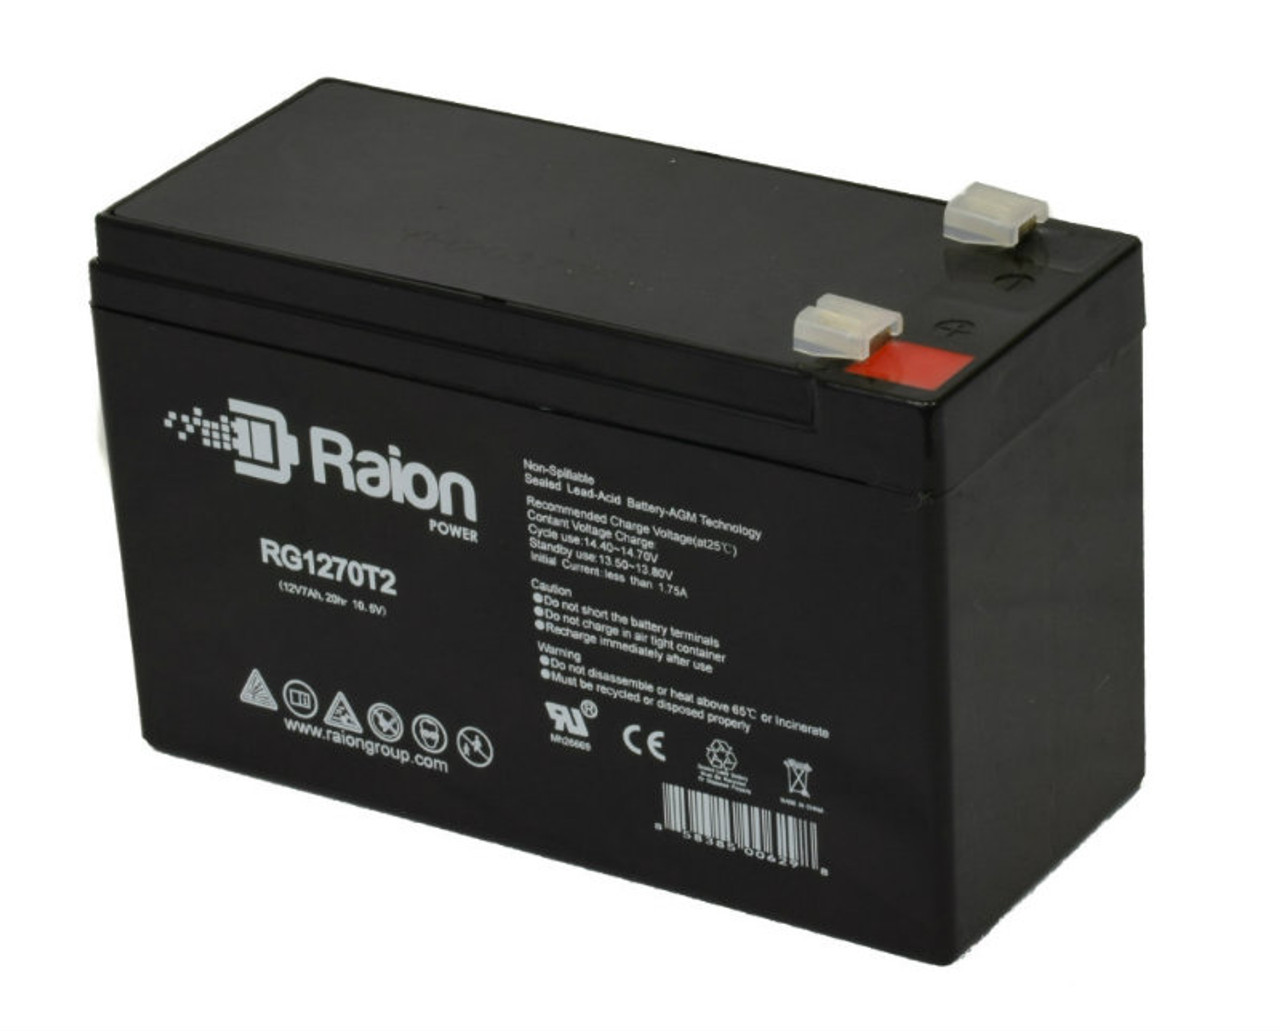 Raion Power RG1270T1 12V 7Ah Non-Spillable Replacement Battery for Valen Topin 12 TP 7